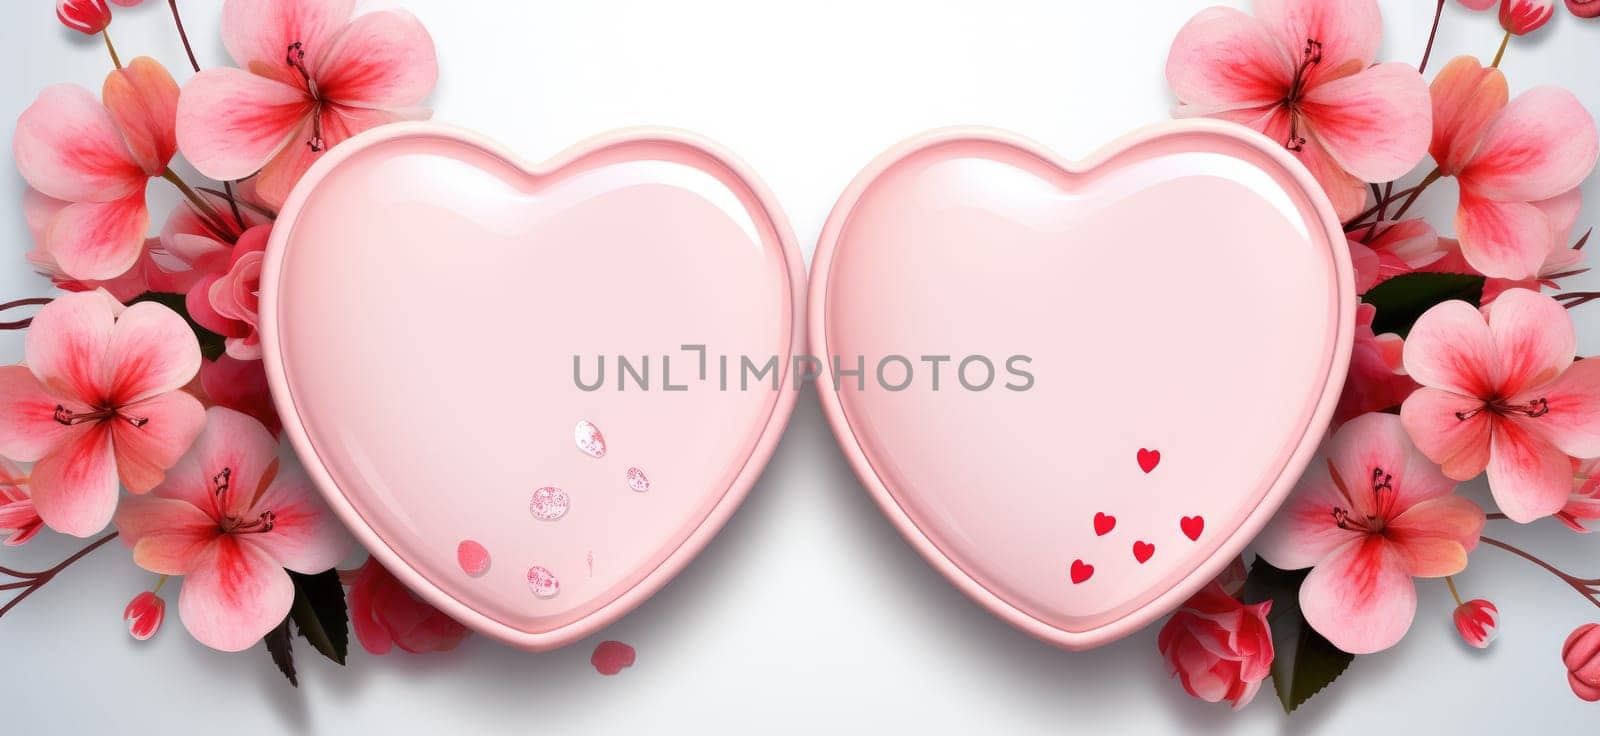 Unique Heart-Shaped Greeting Card with Photo Insert by Yurich32